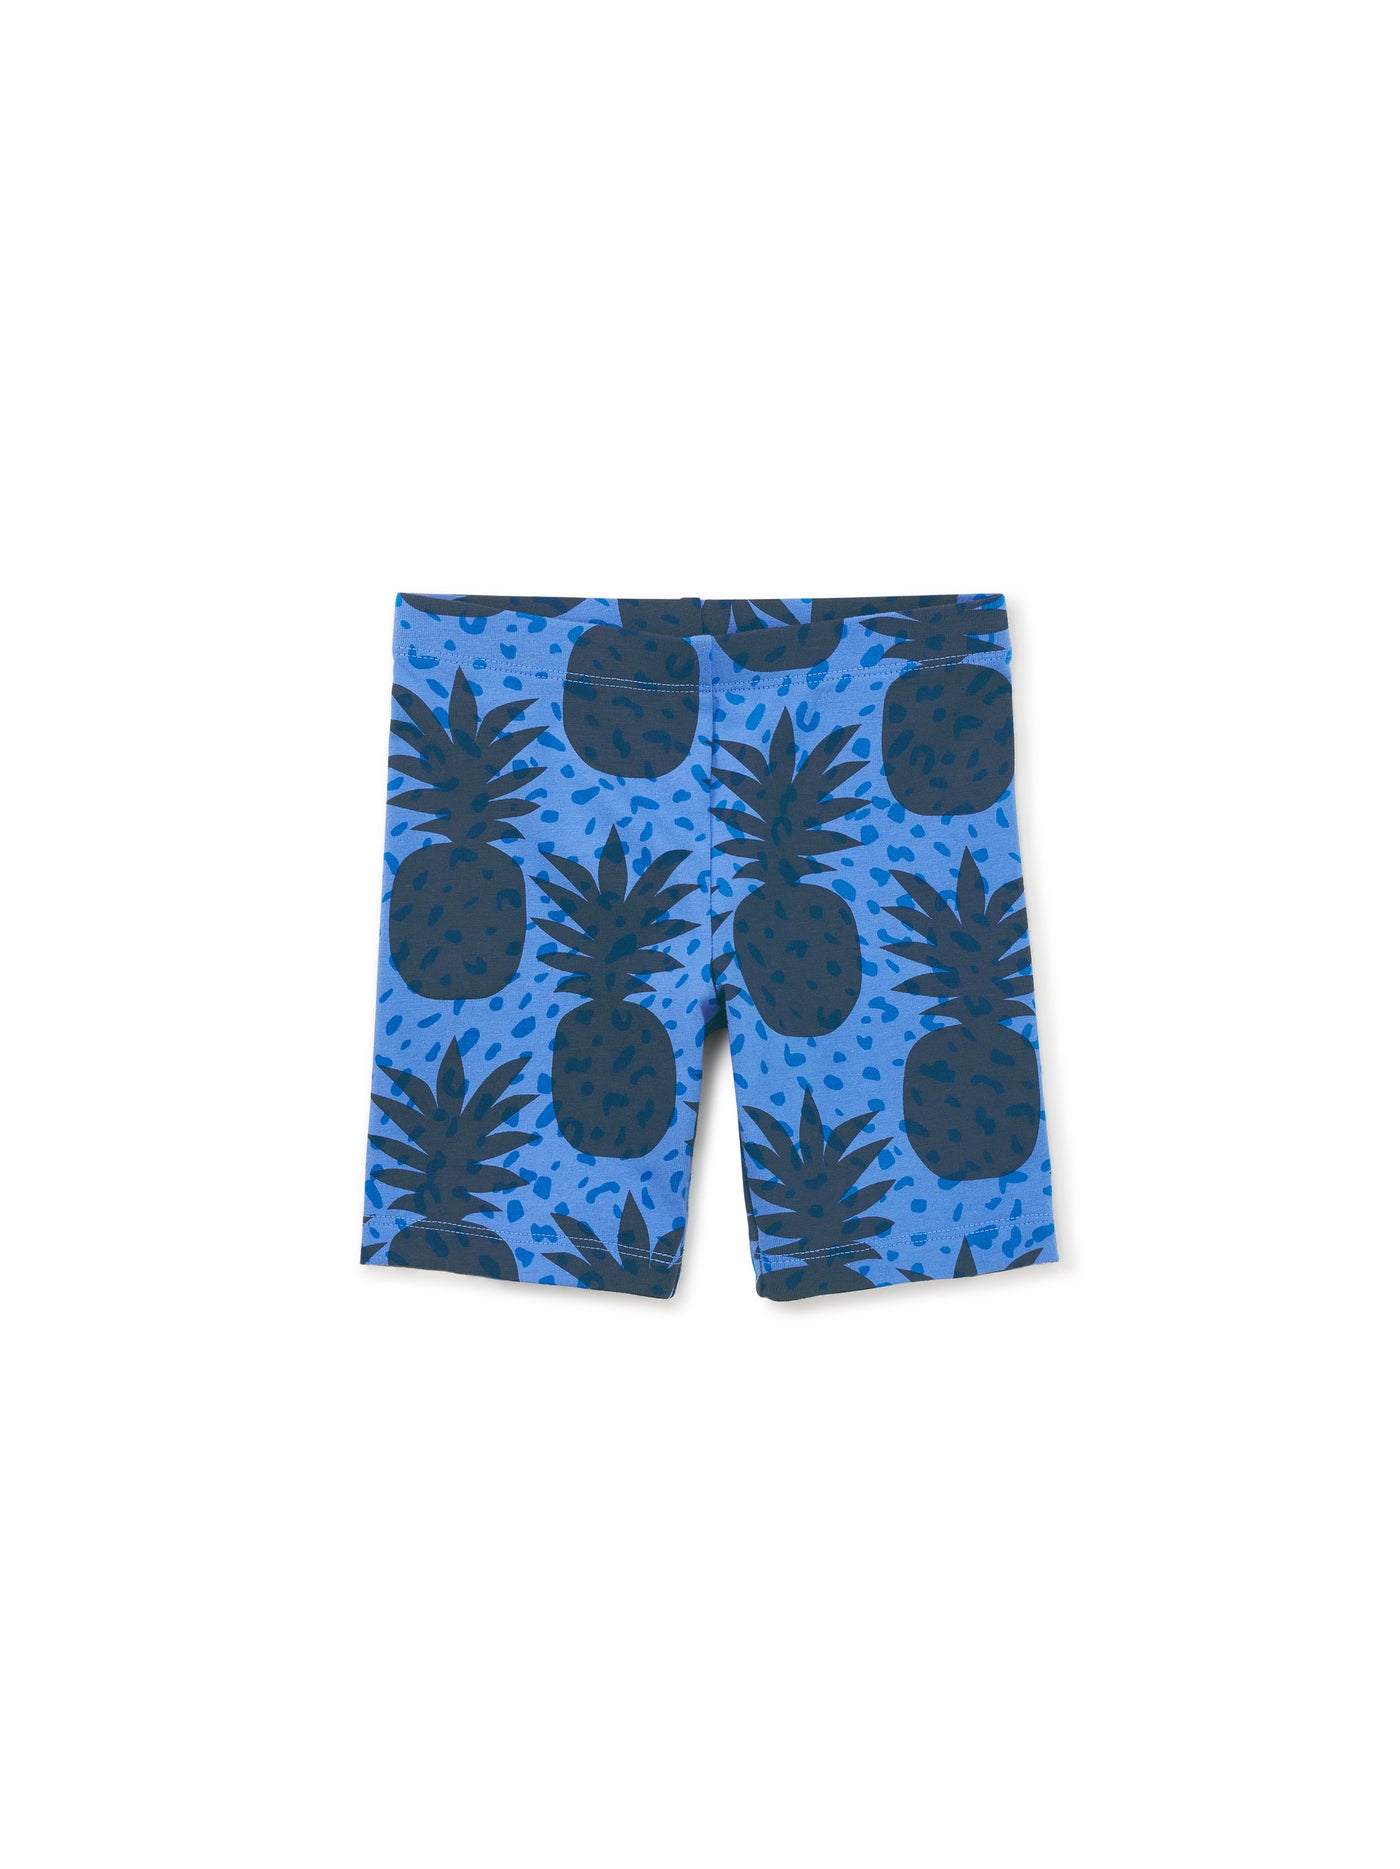 Printed Bike Shorts/Spotted Pineapple